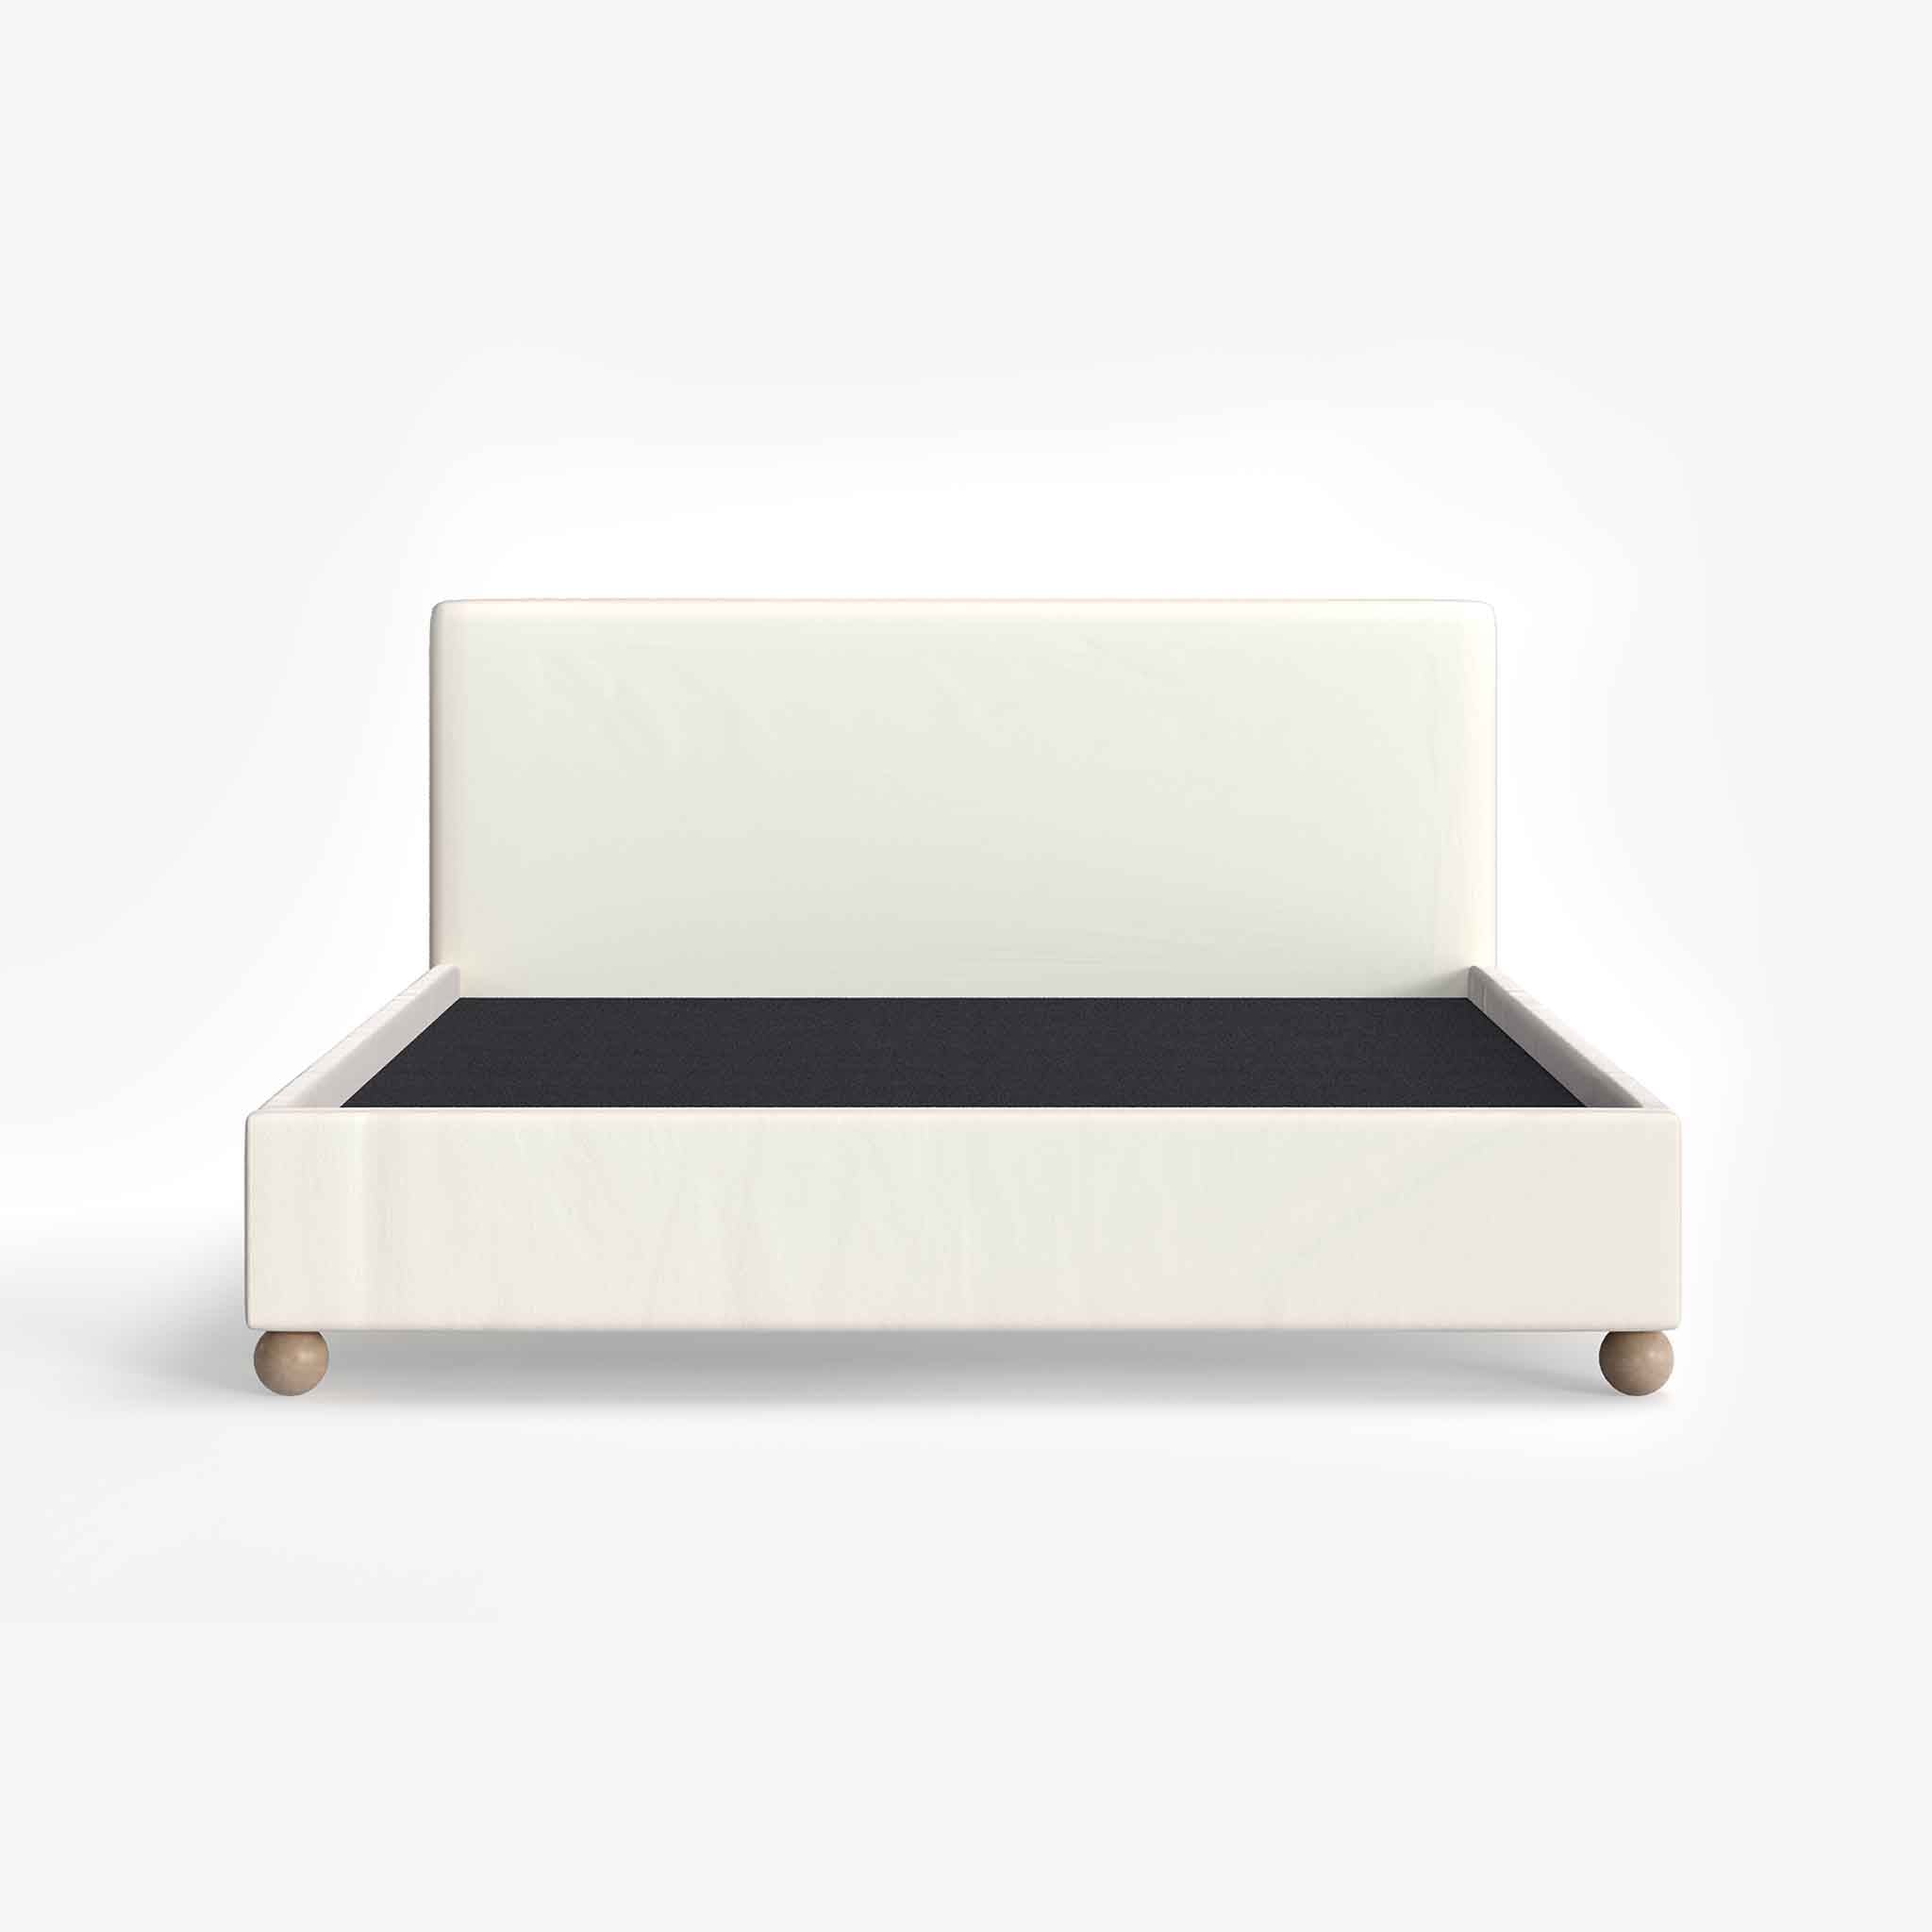 O'Halloran Velvet Upholstered Bed with end-lift Ottoman Storage, Contemporary Interiors, Online Shopping, Craftsmanship, Wooden feet, Bazaar